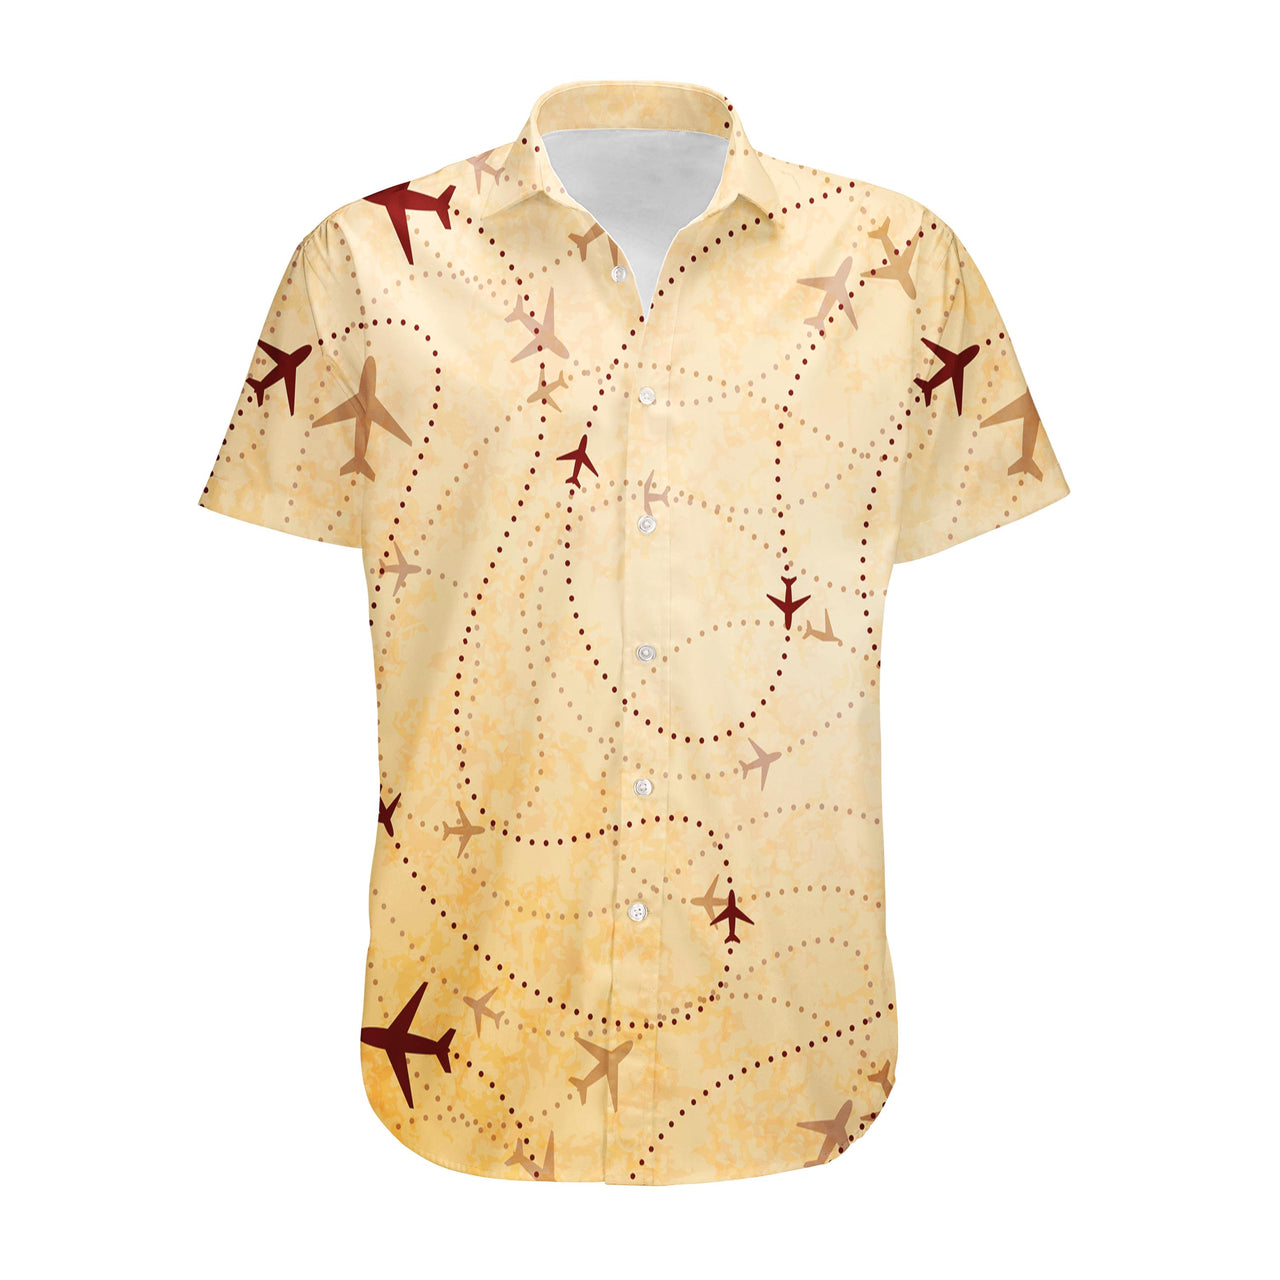 Vintage Travelling with Aircraft Designed 3D Shirts